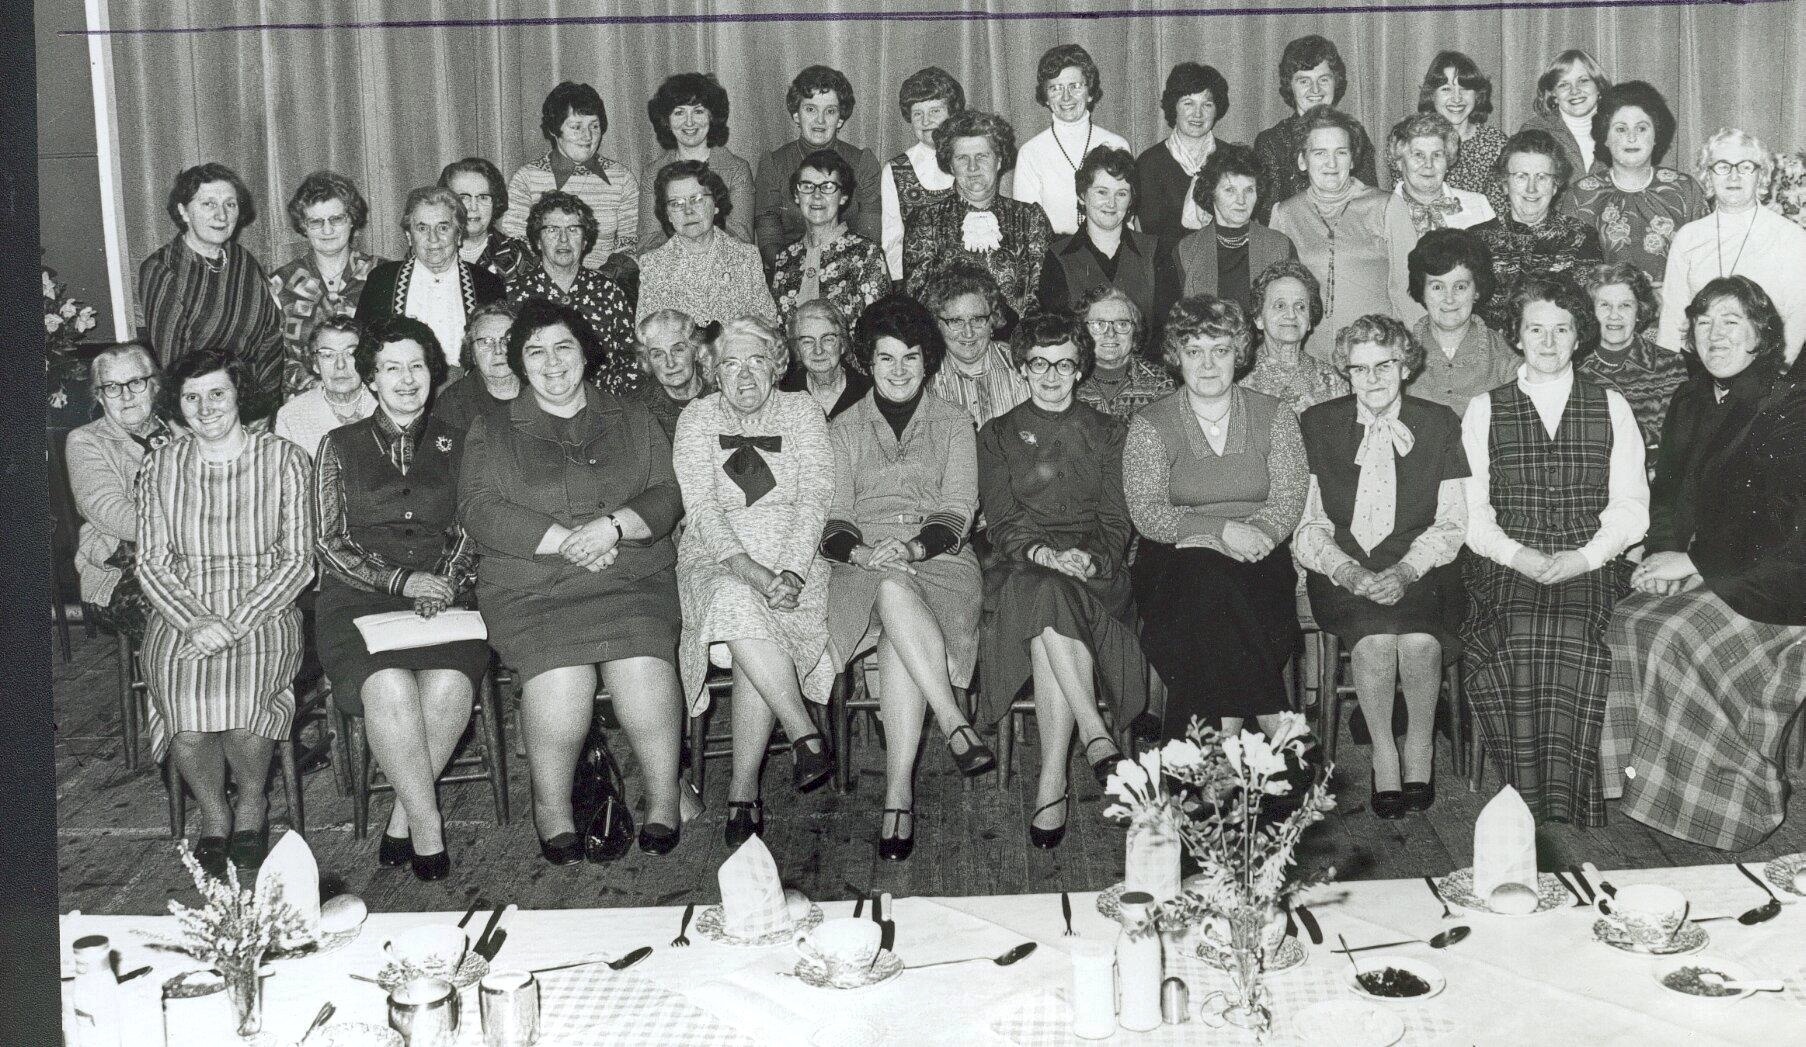 Llanrhaeadr St Davids Day dinner. Do you know the year?